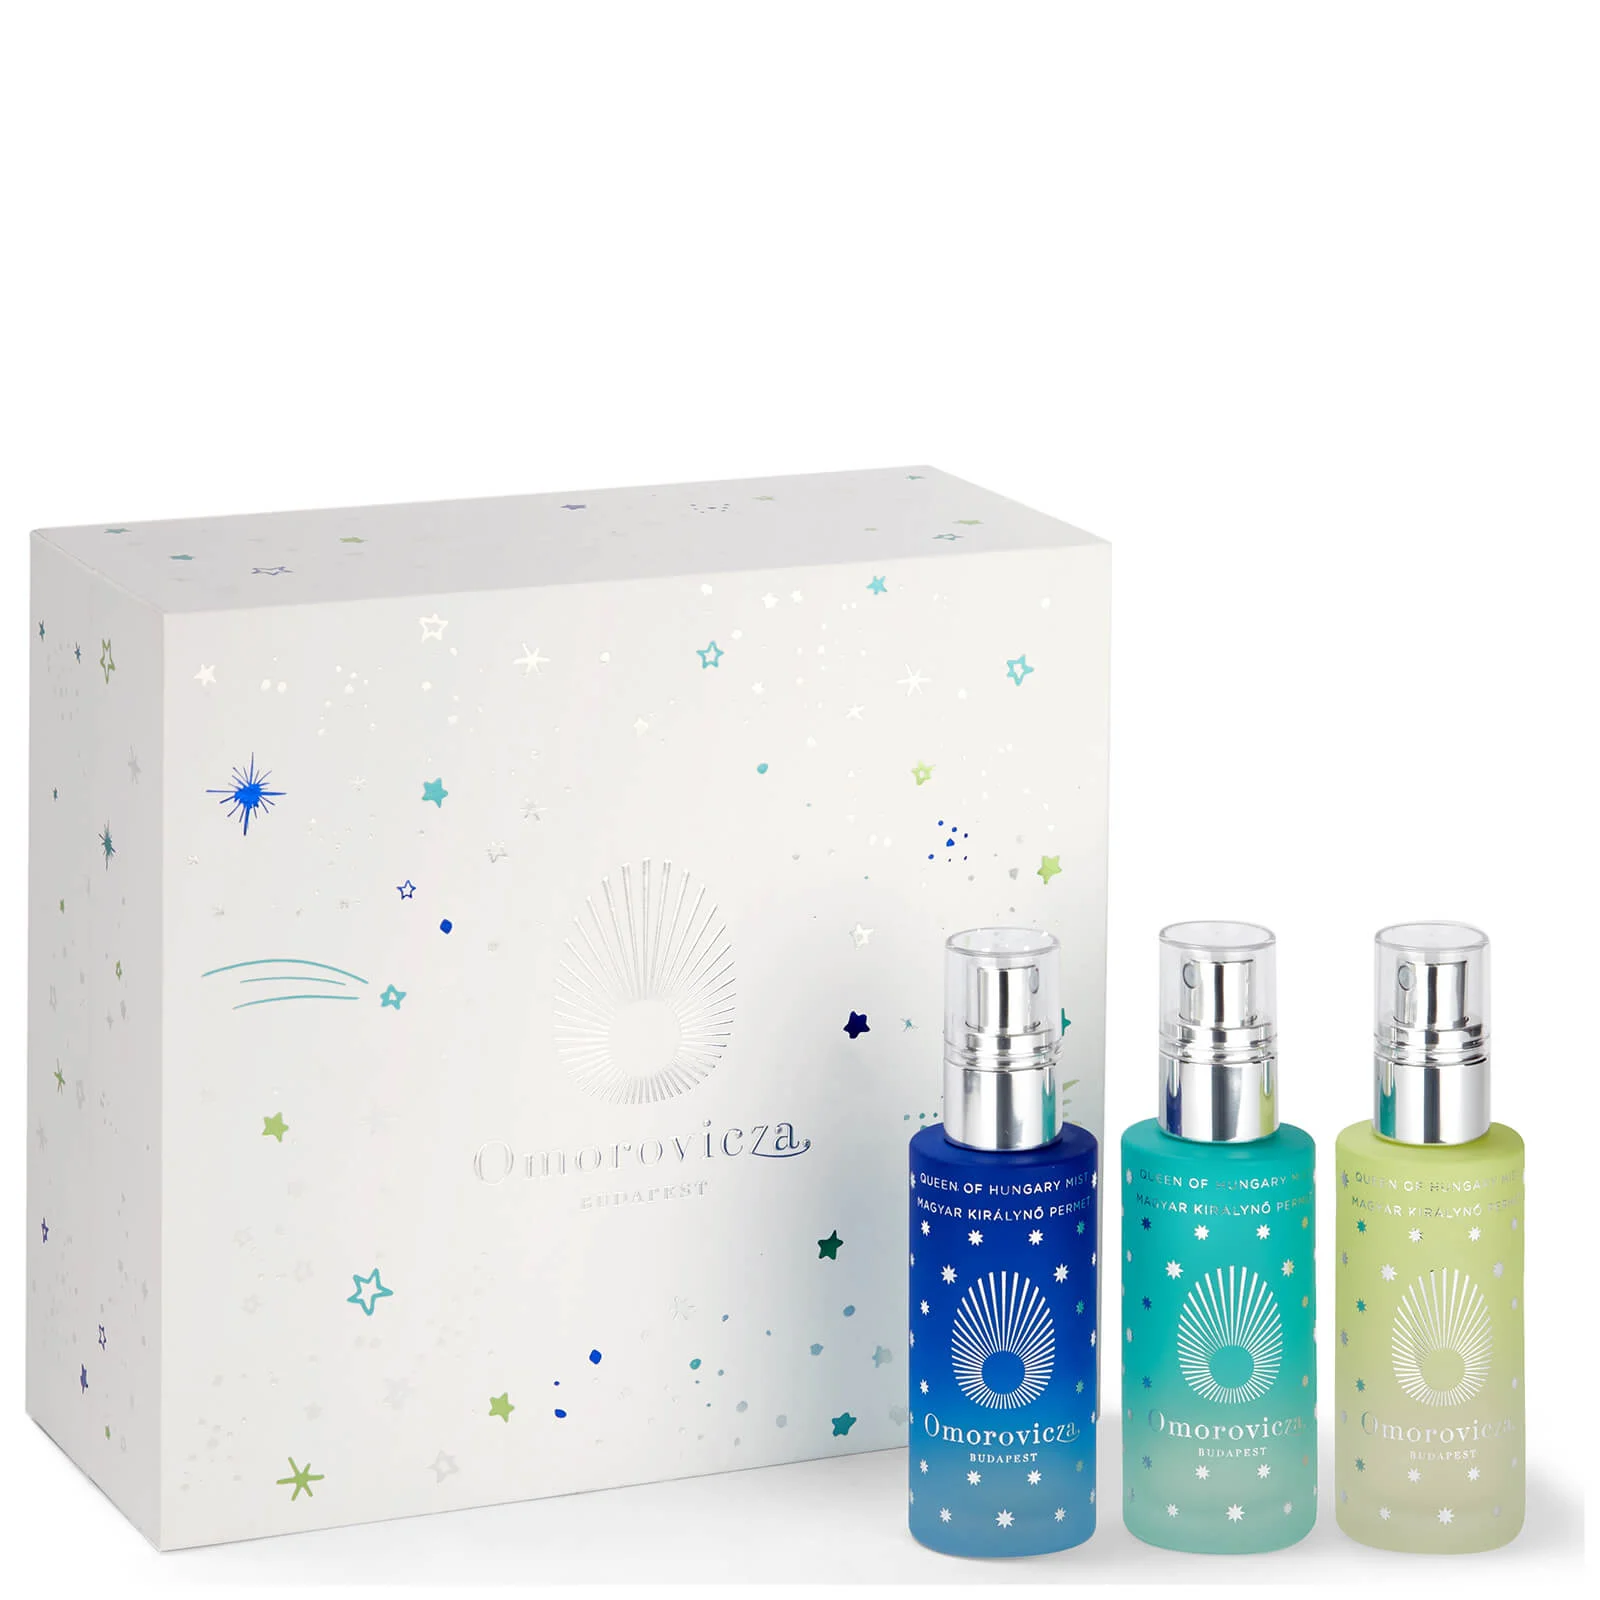 Omorovicza Queen of Hungary Mist Set (Worth £75.00) Image 1